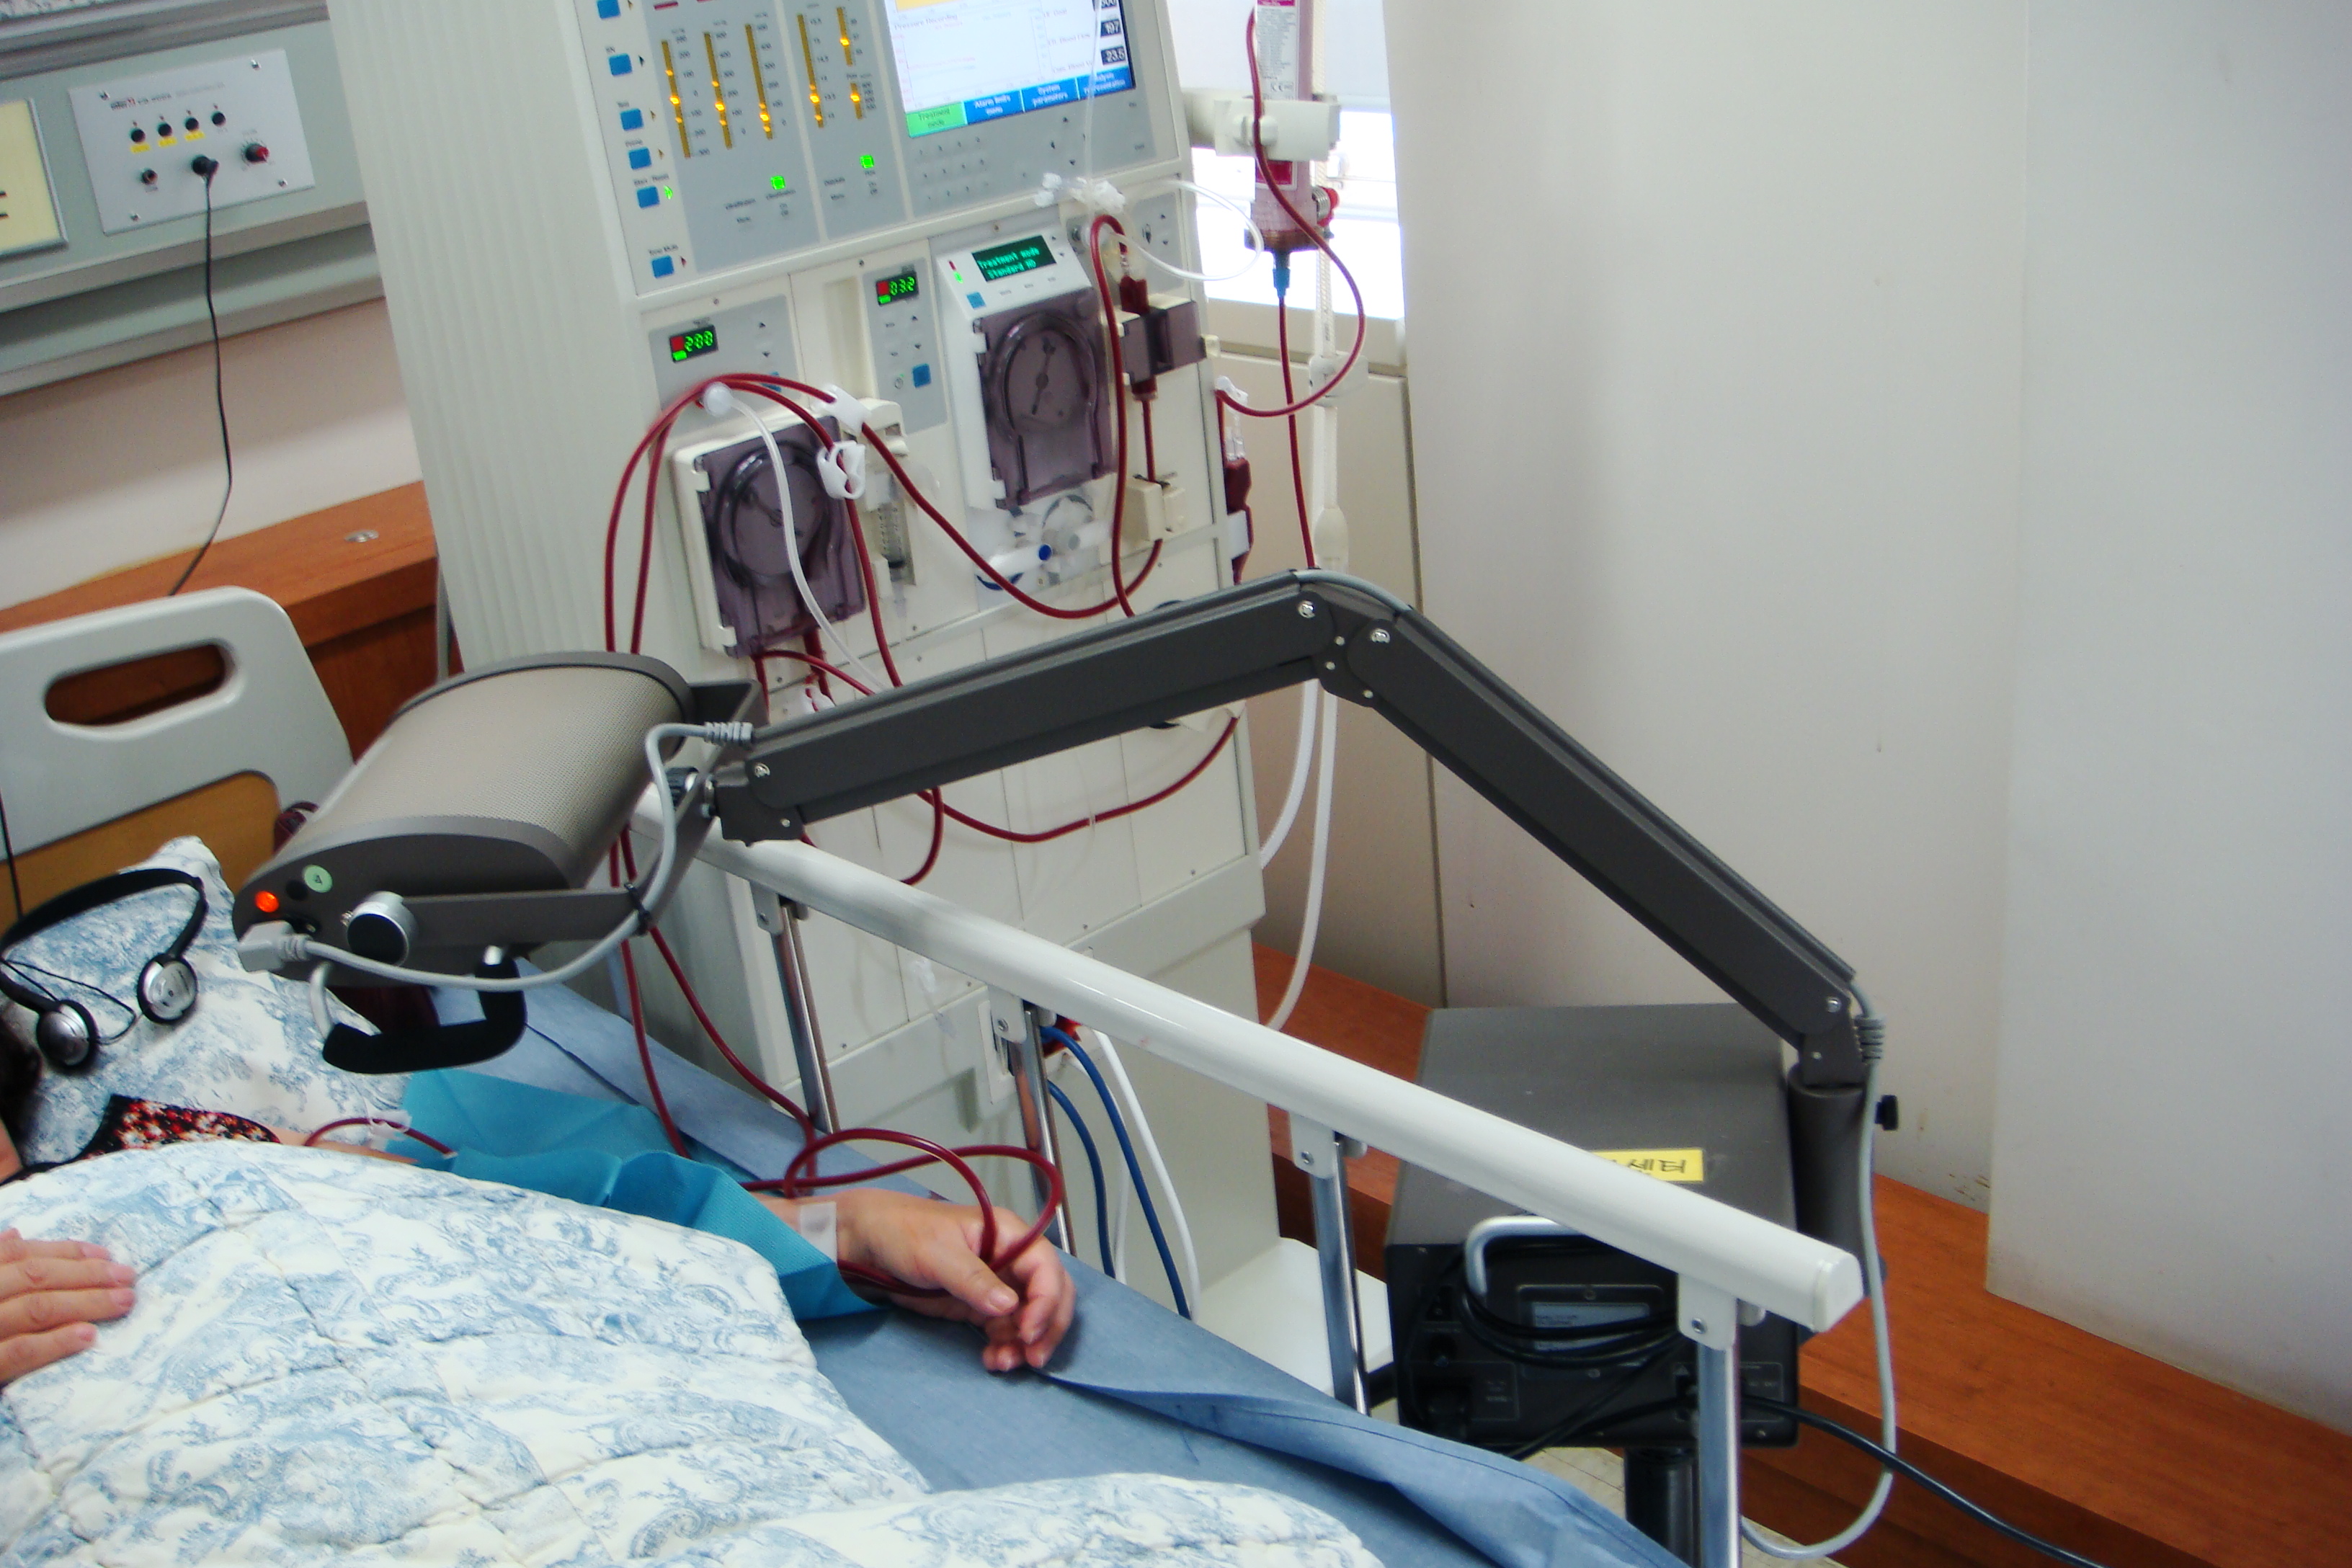 Vascular Access  FIRAPY Far-infrared therapy unit